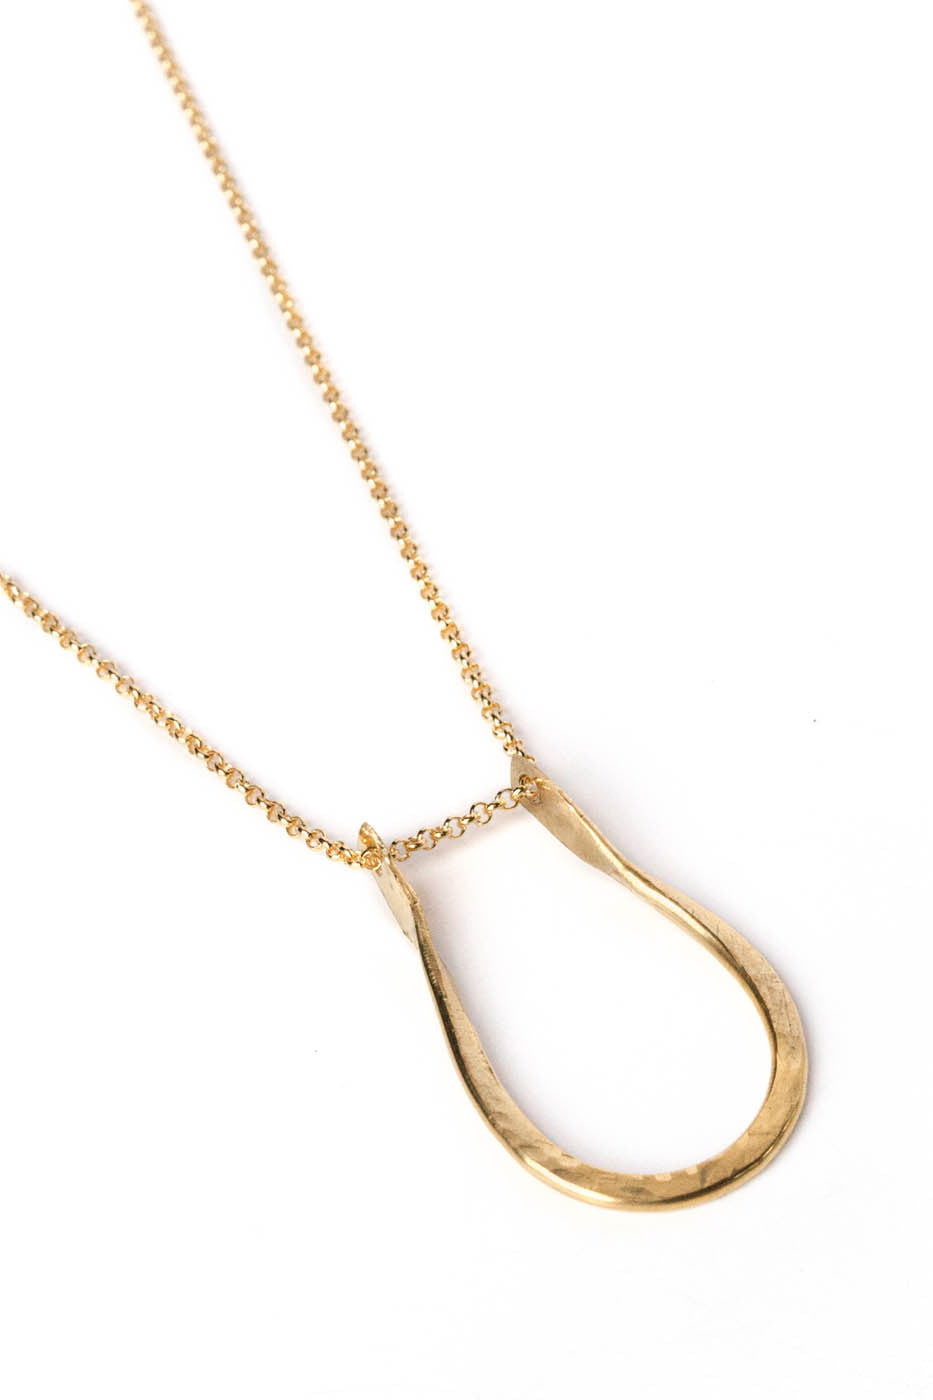 Pinched “U” Necklace on Gold Chain